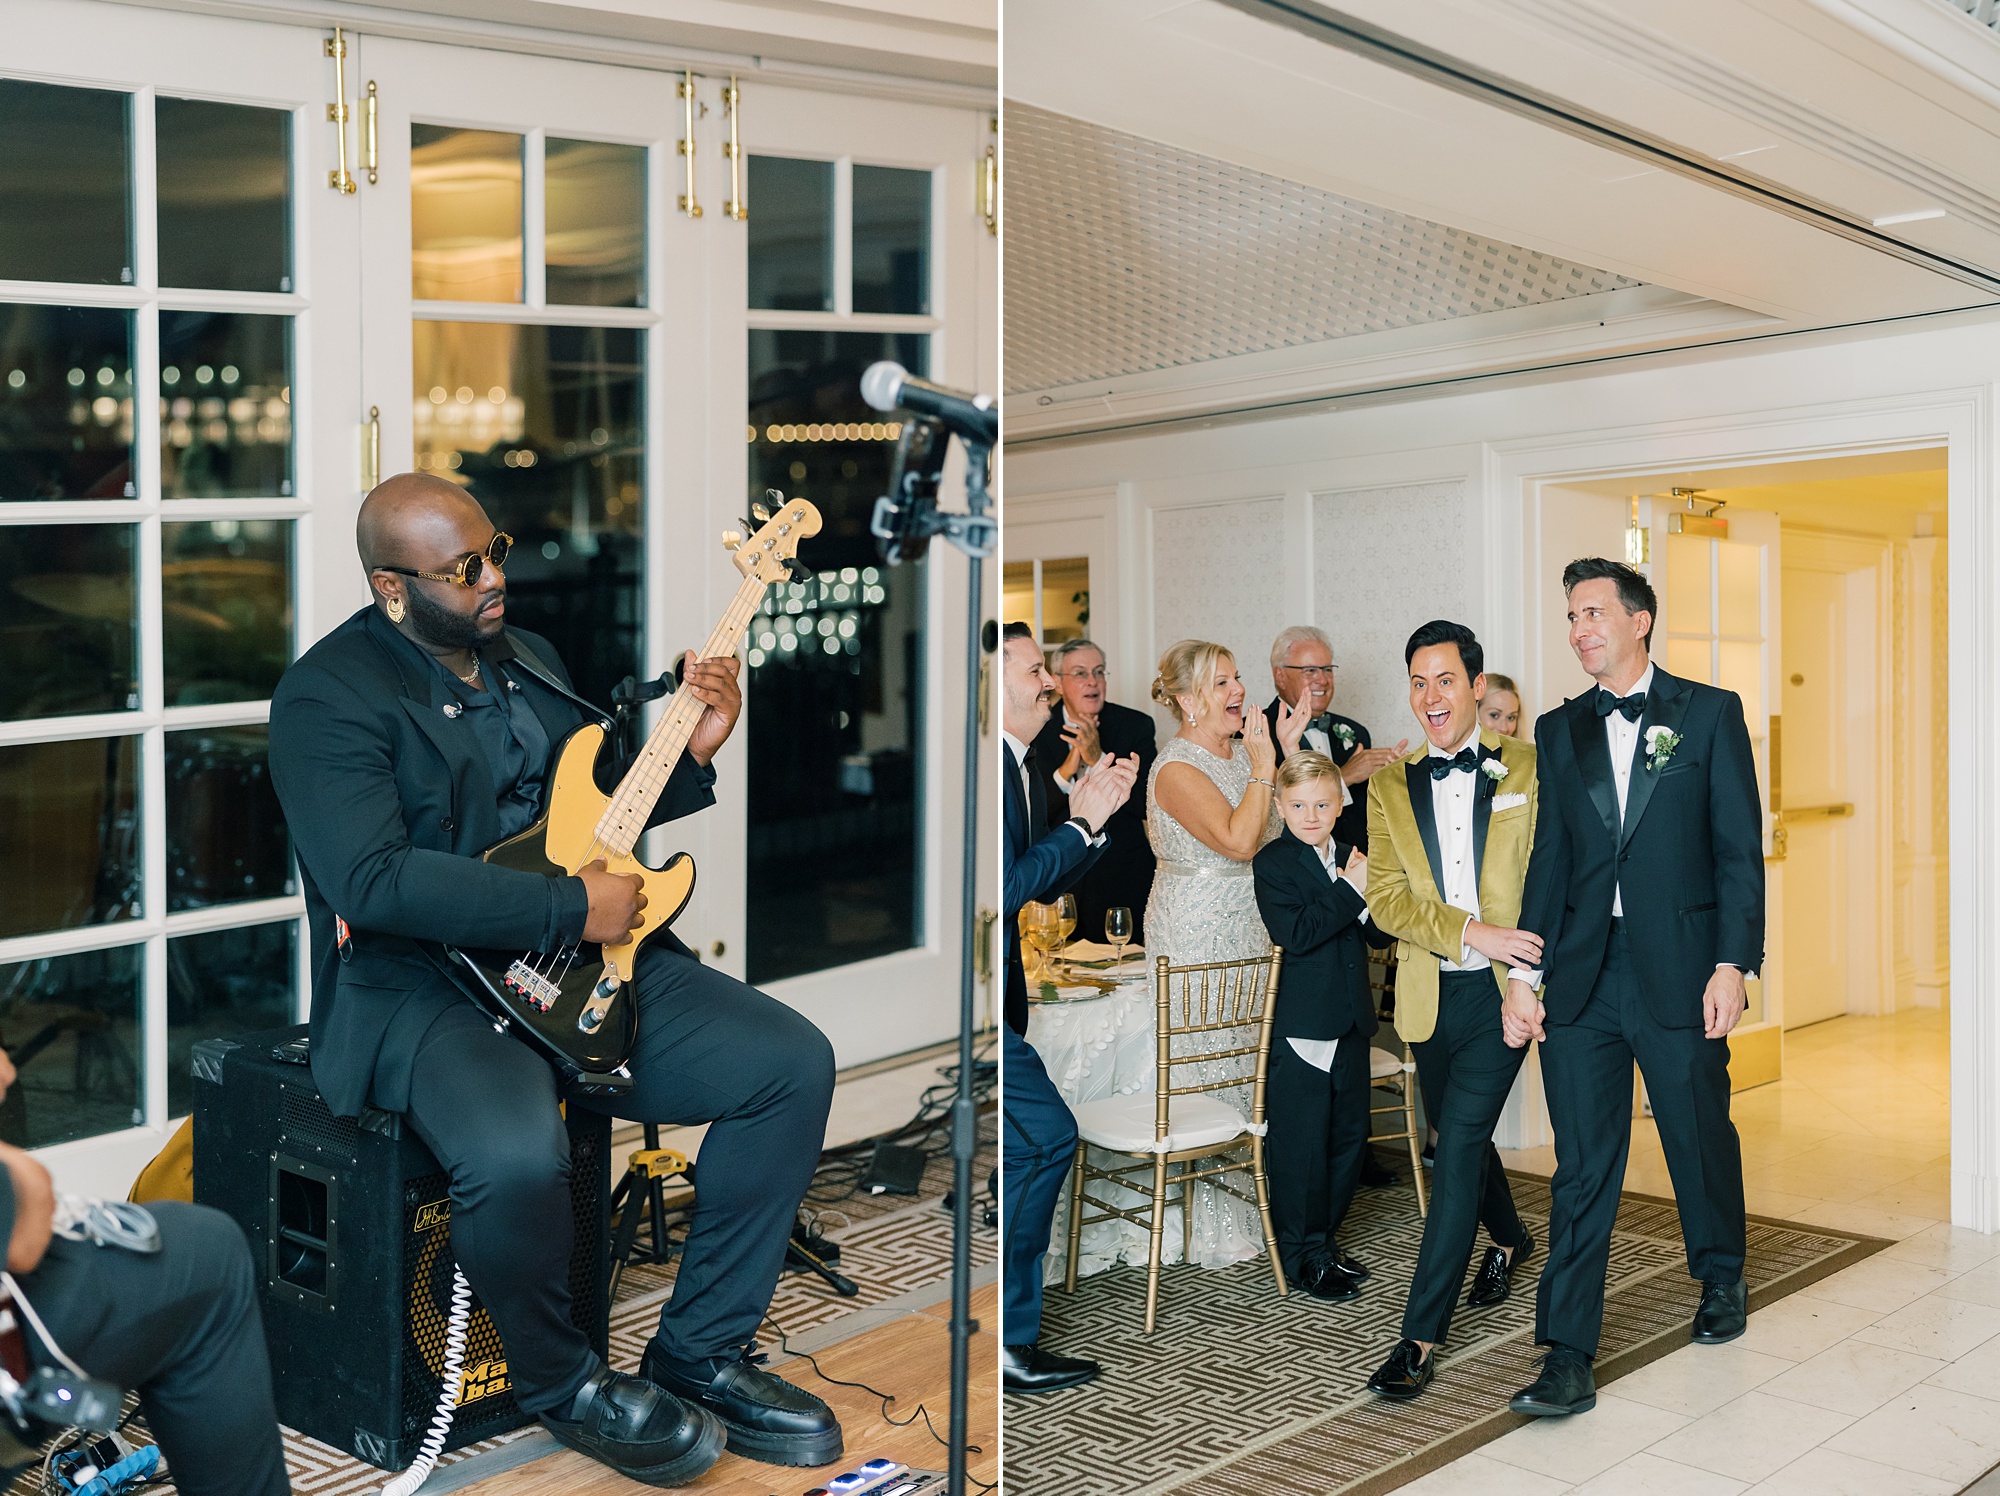 musician plays electric guitar during DC wedding reception at the Hay Adams Hotel